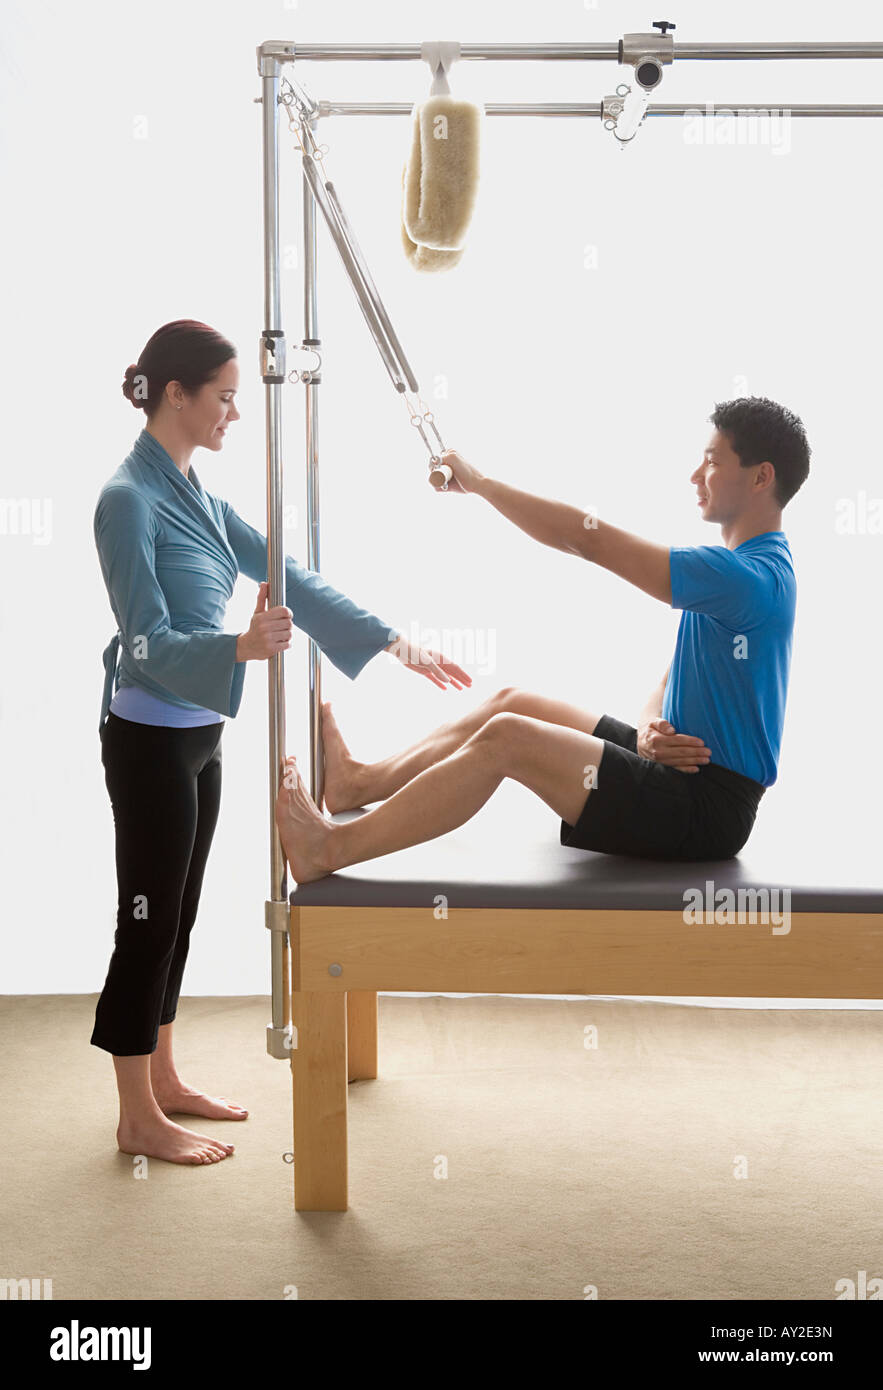 Instructor helping man on exercise equipment Stock Photo